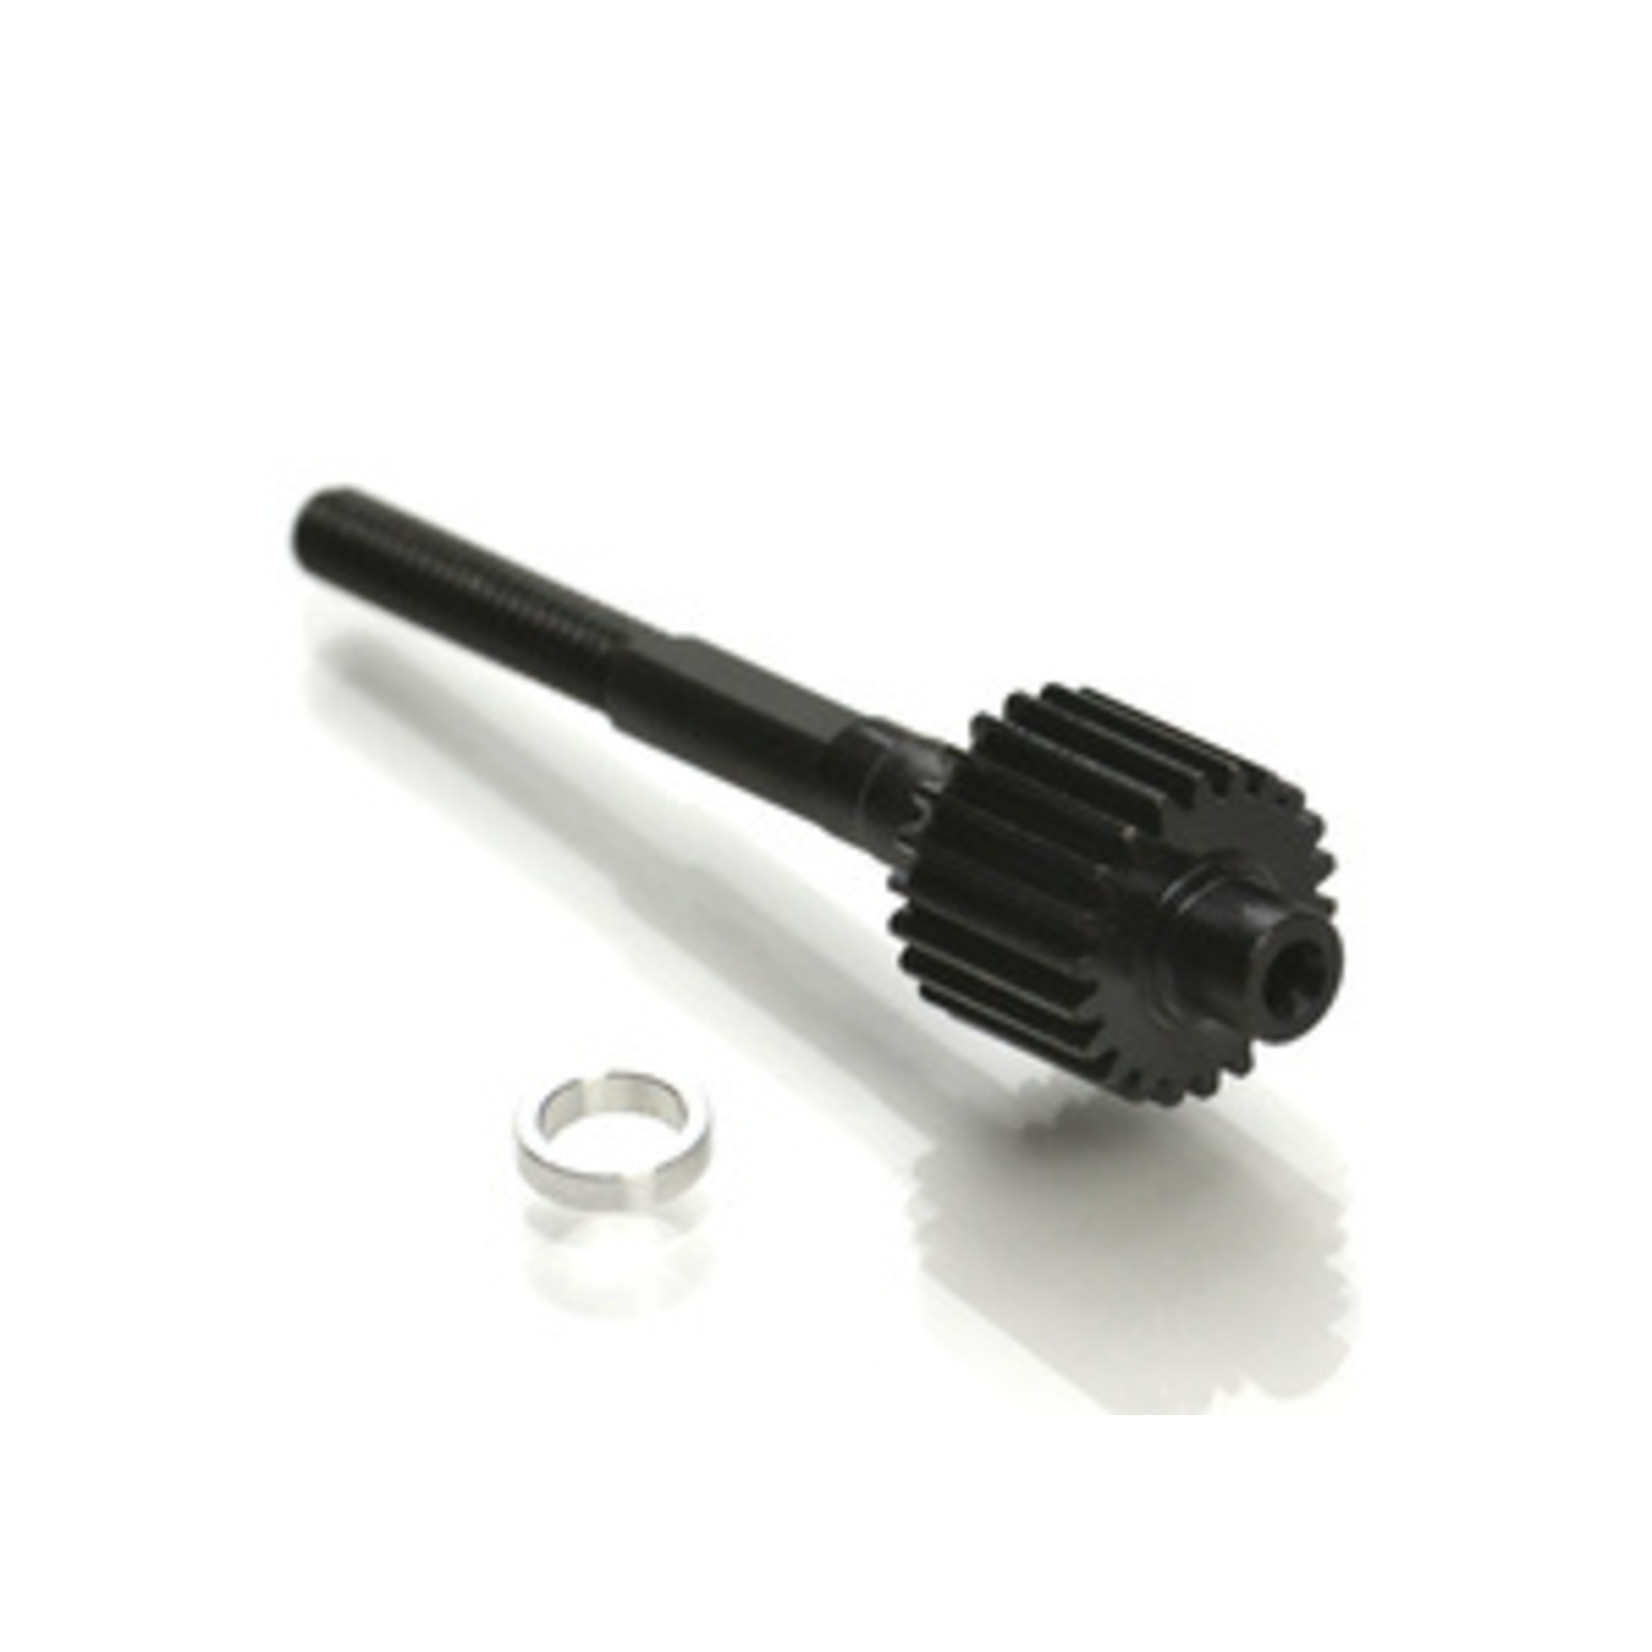 Exotek Racing EXO2017 Steel Top Shaft, Heavy Duty, Compatible with Slash, for MK2 and DR10 Slippers